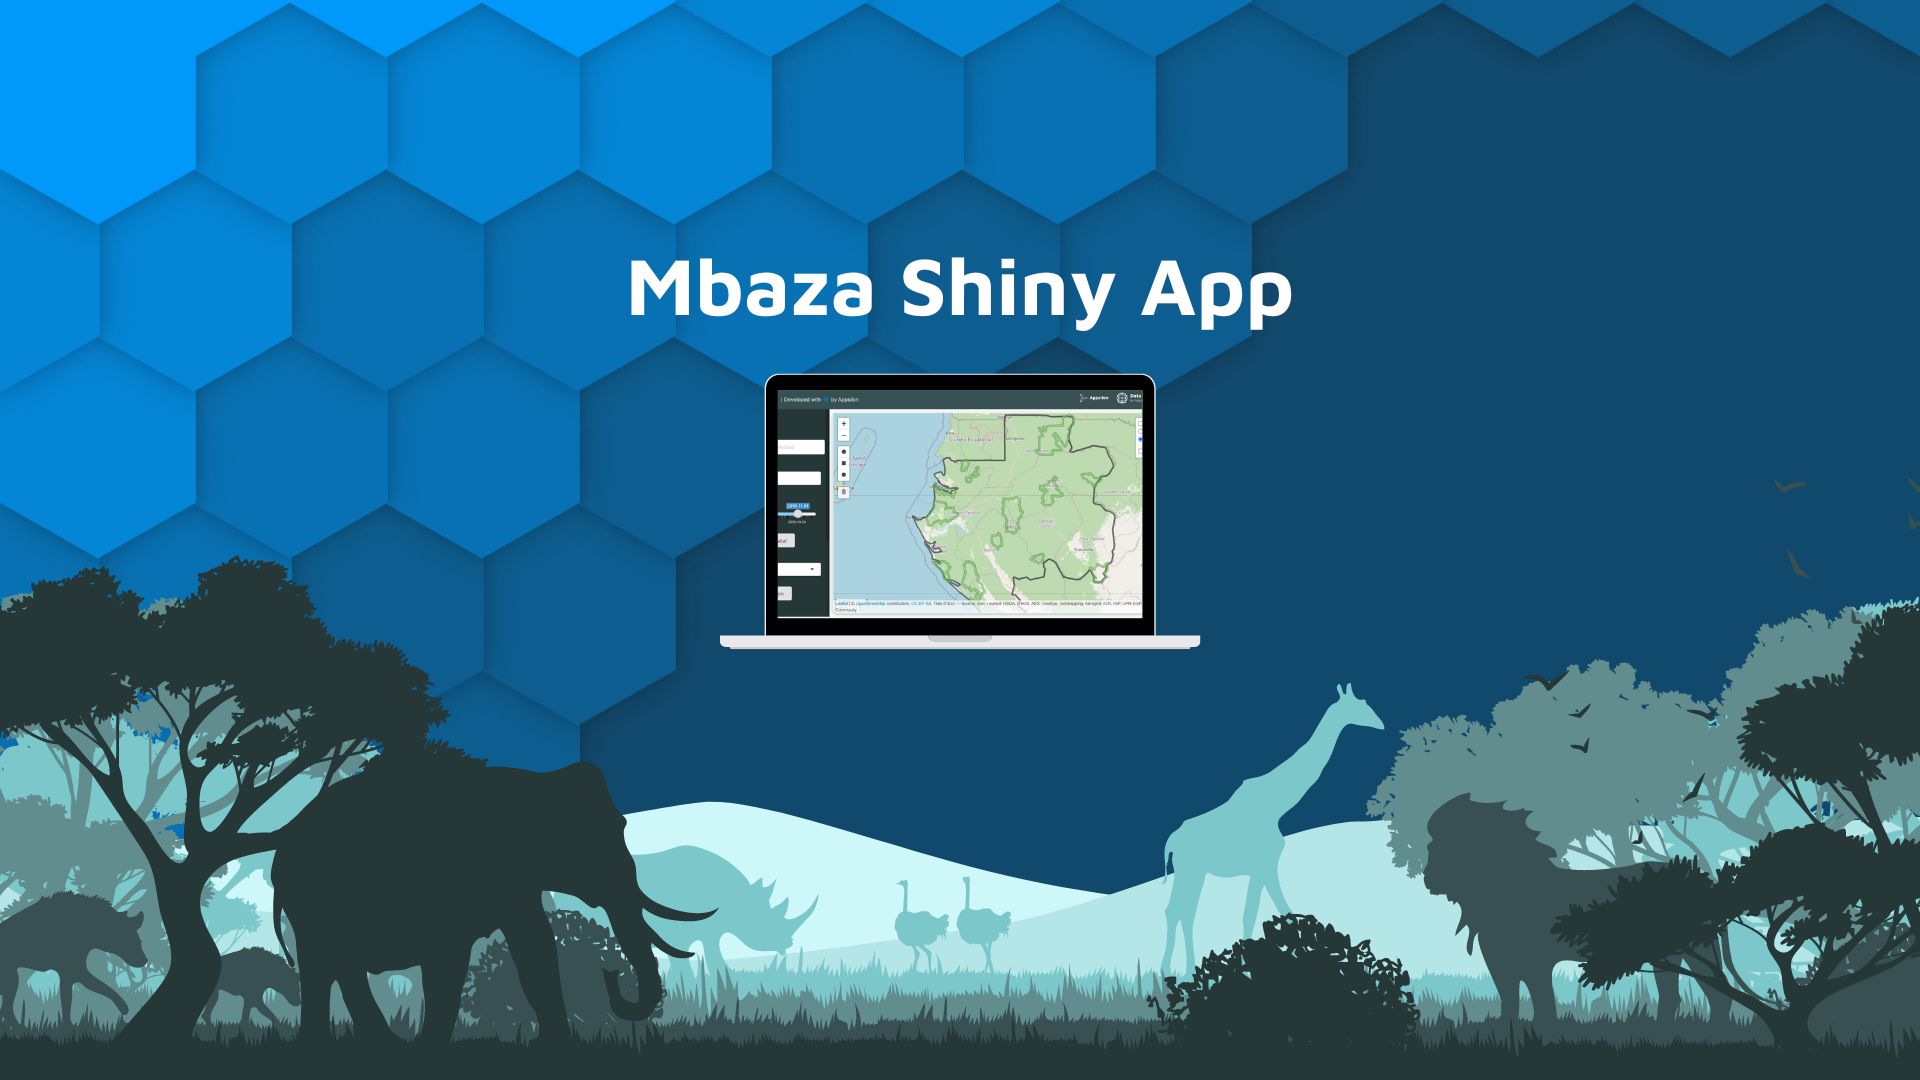 Mbaza Shiny App case study blog hero banner with white text, "Mbaza Shiny App" and dashboard screenshot